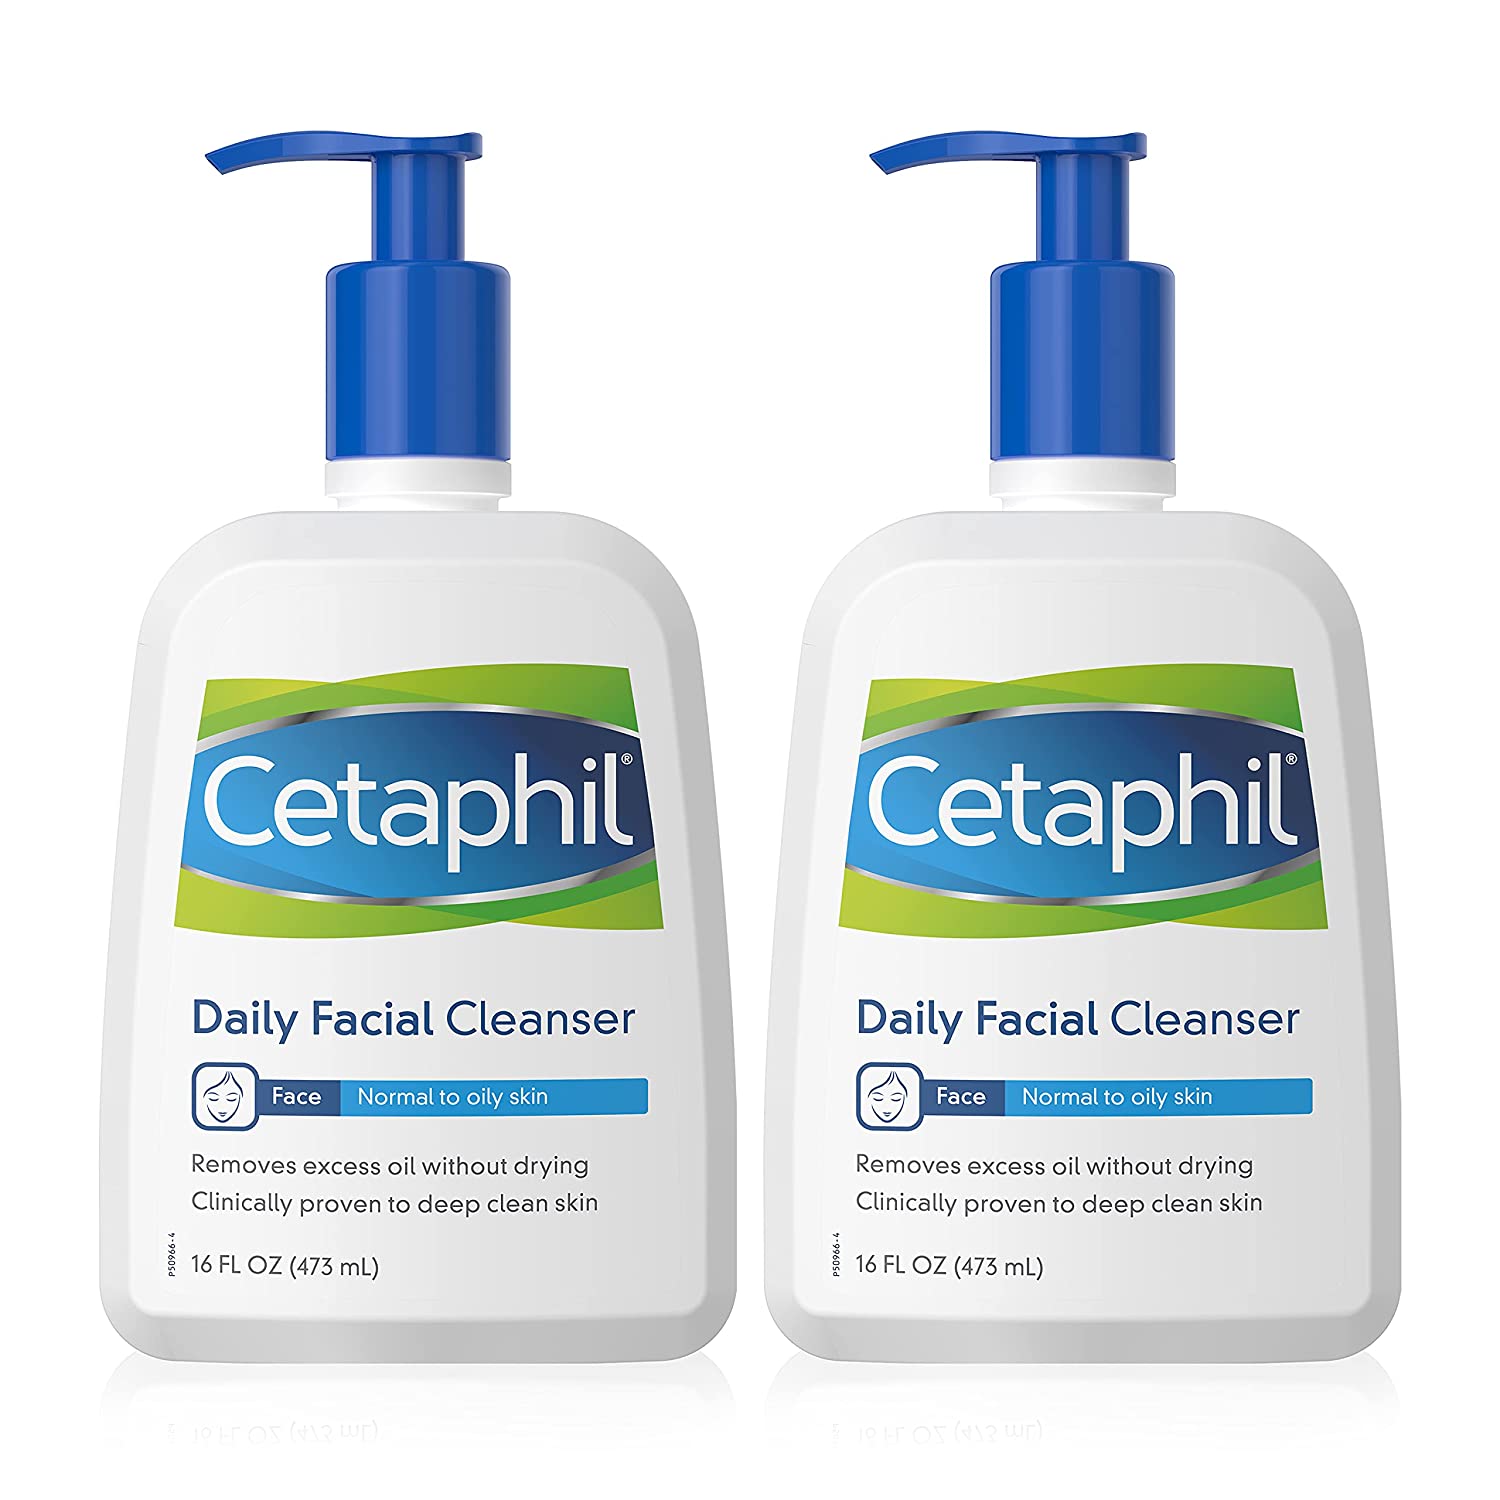 Large bottle of Cetaphil for normal to oily skin daily facial cleaner from the USA